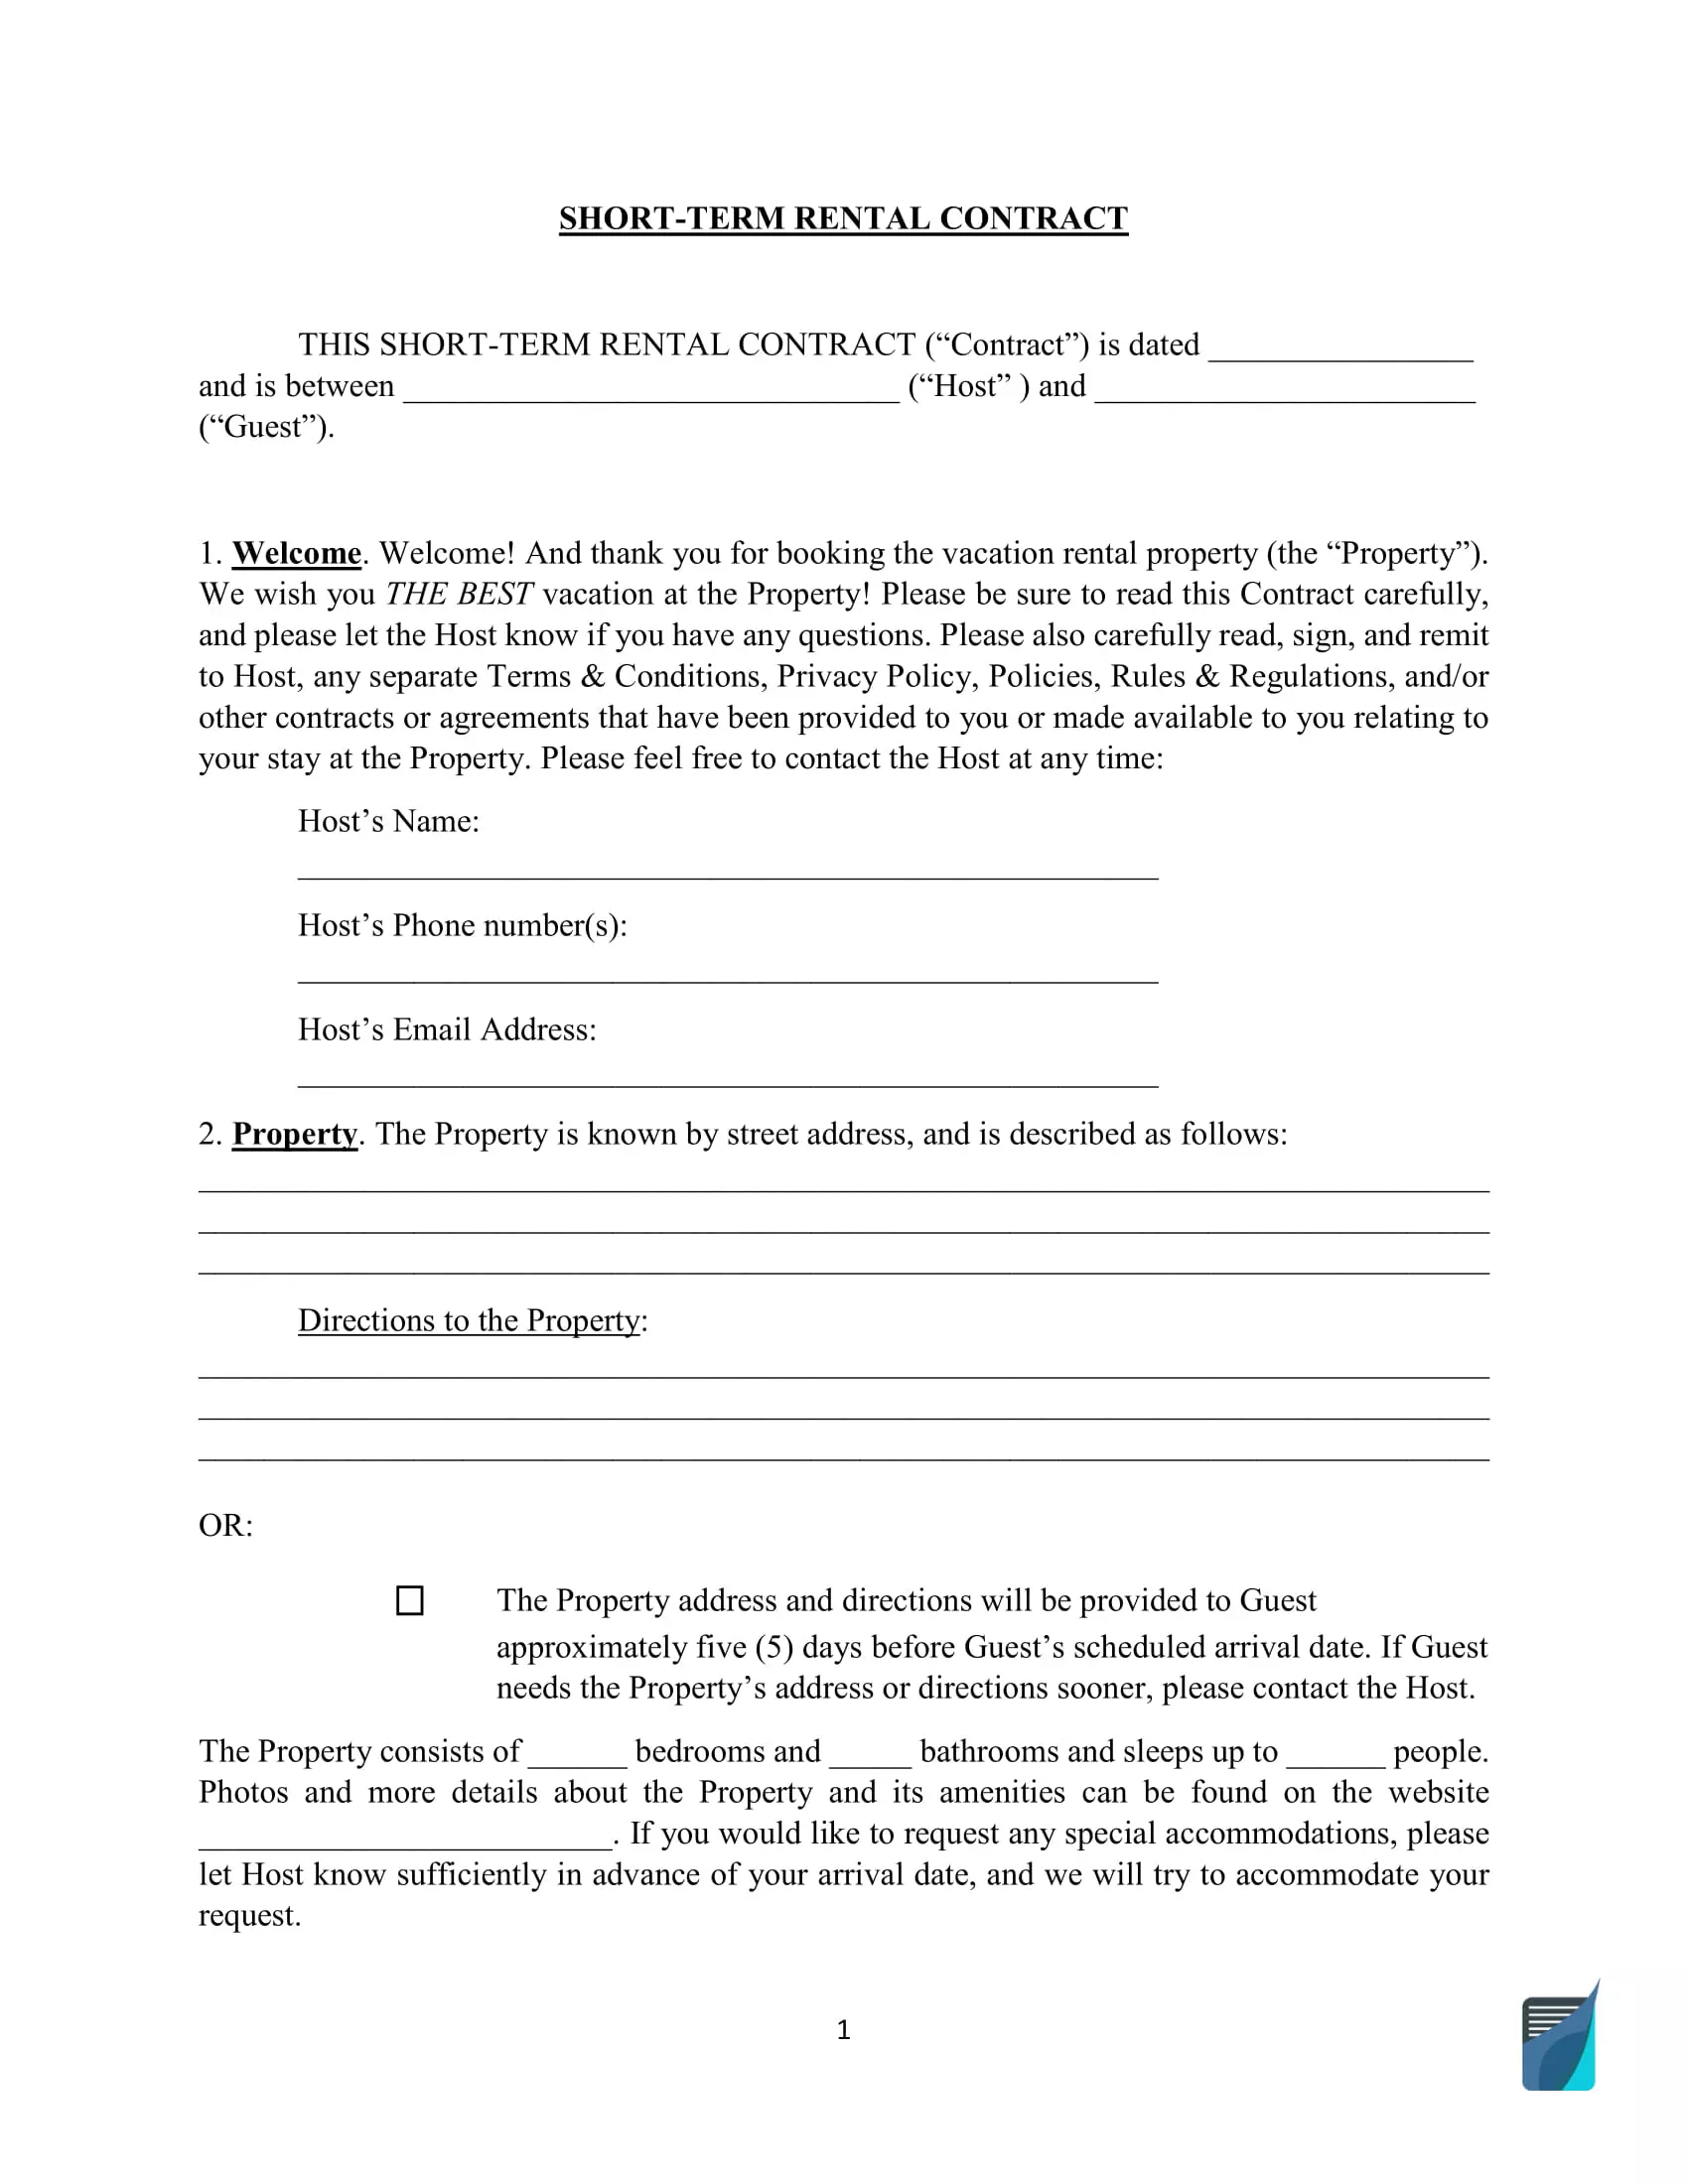 Free Short-Term Rental Agreement Templates  FormsPal With vacation rental lease agreement template